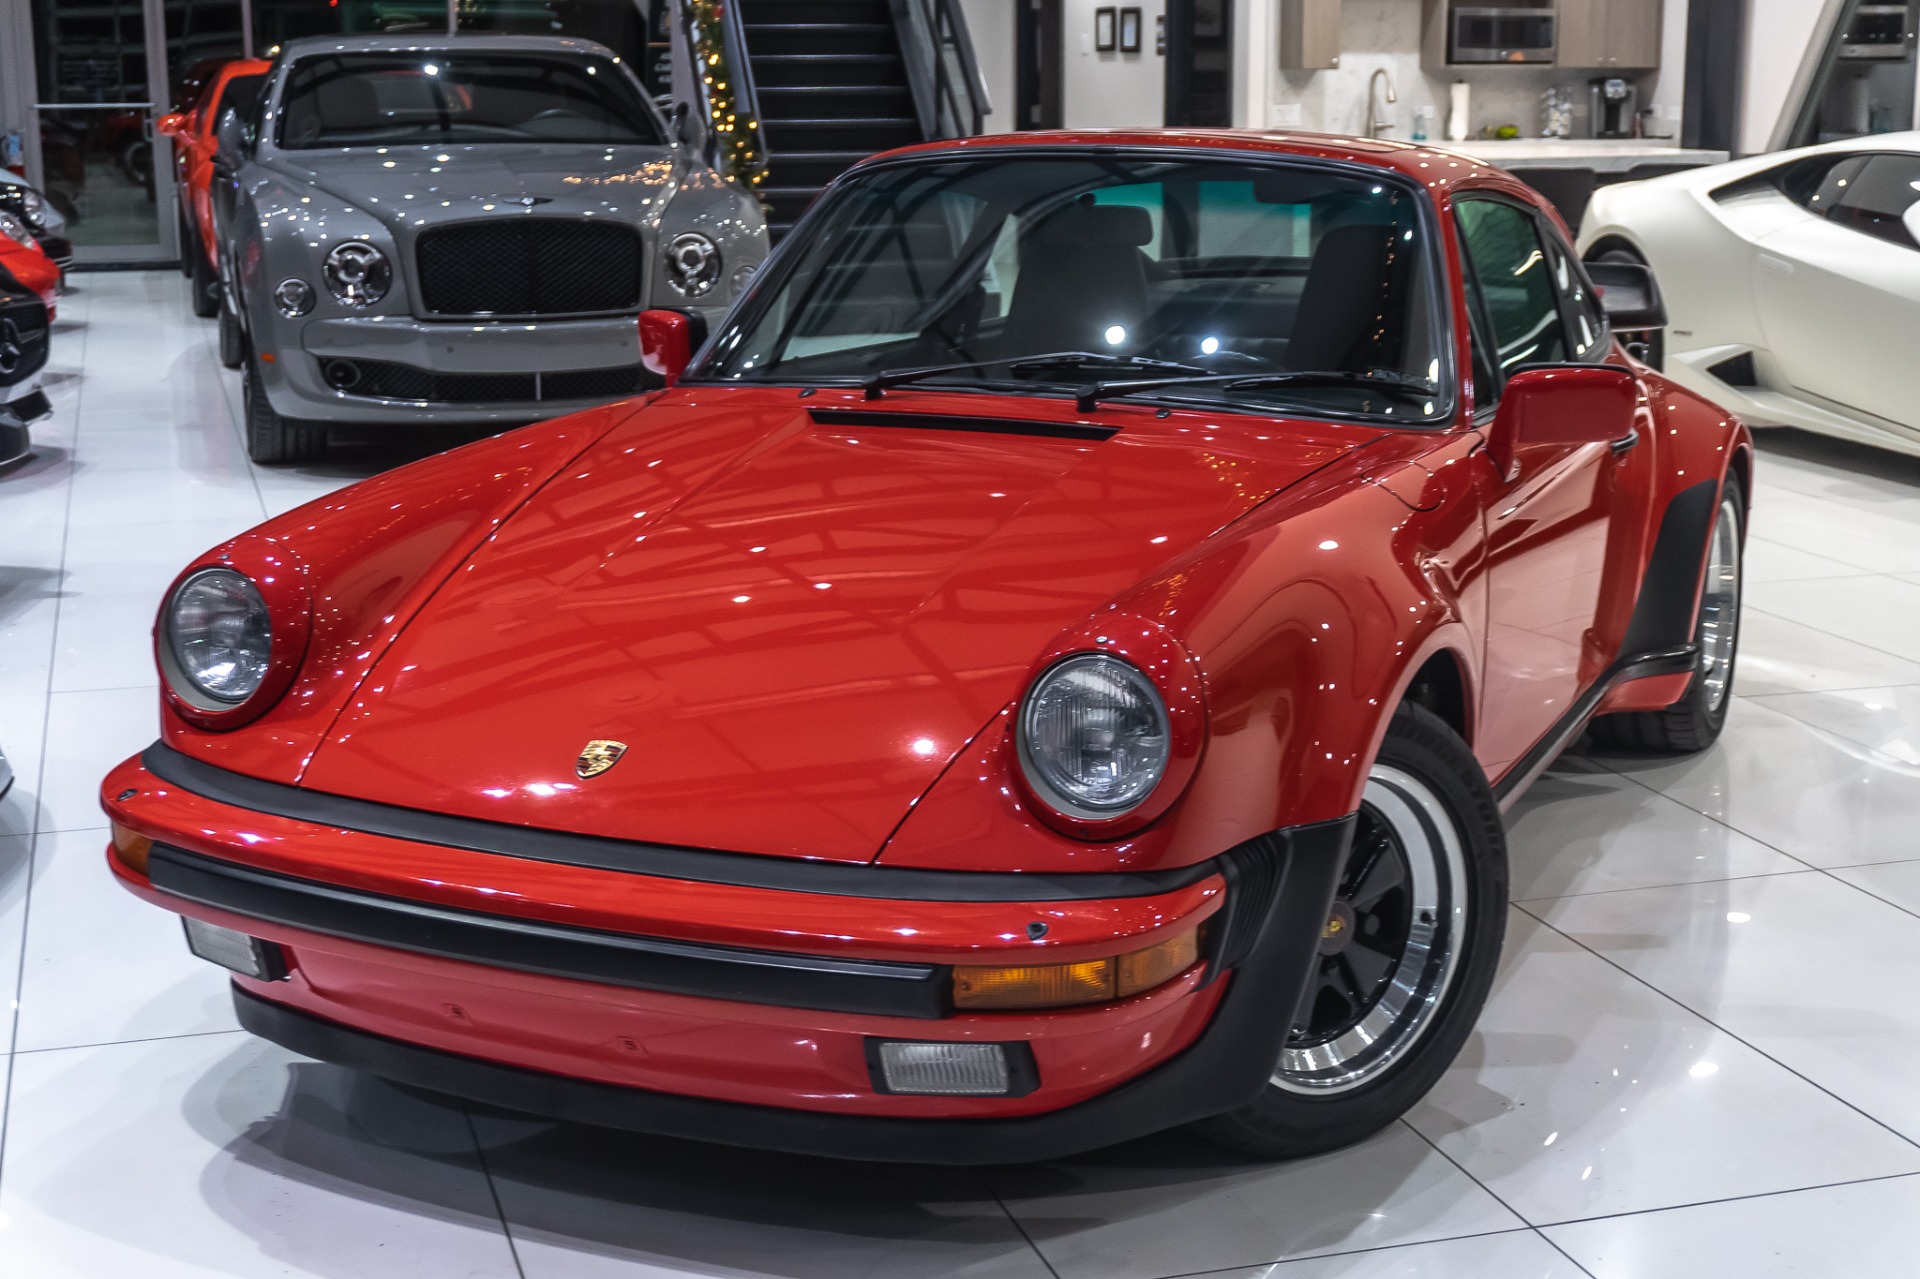 Used-1986-Porsche-911-Turbo-Coupe-Power-Seat-PKG-New-Clutch-Service-History